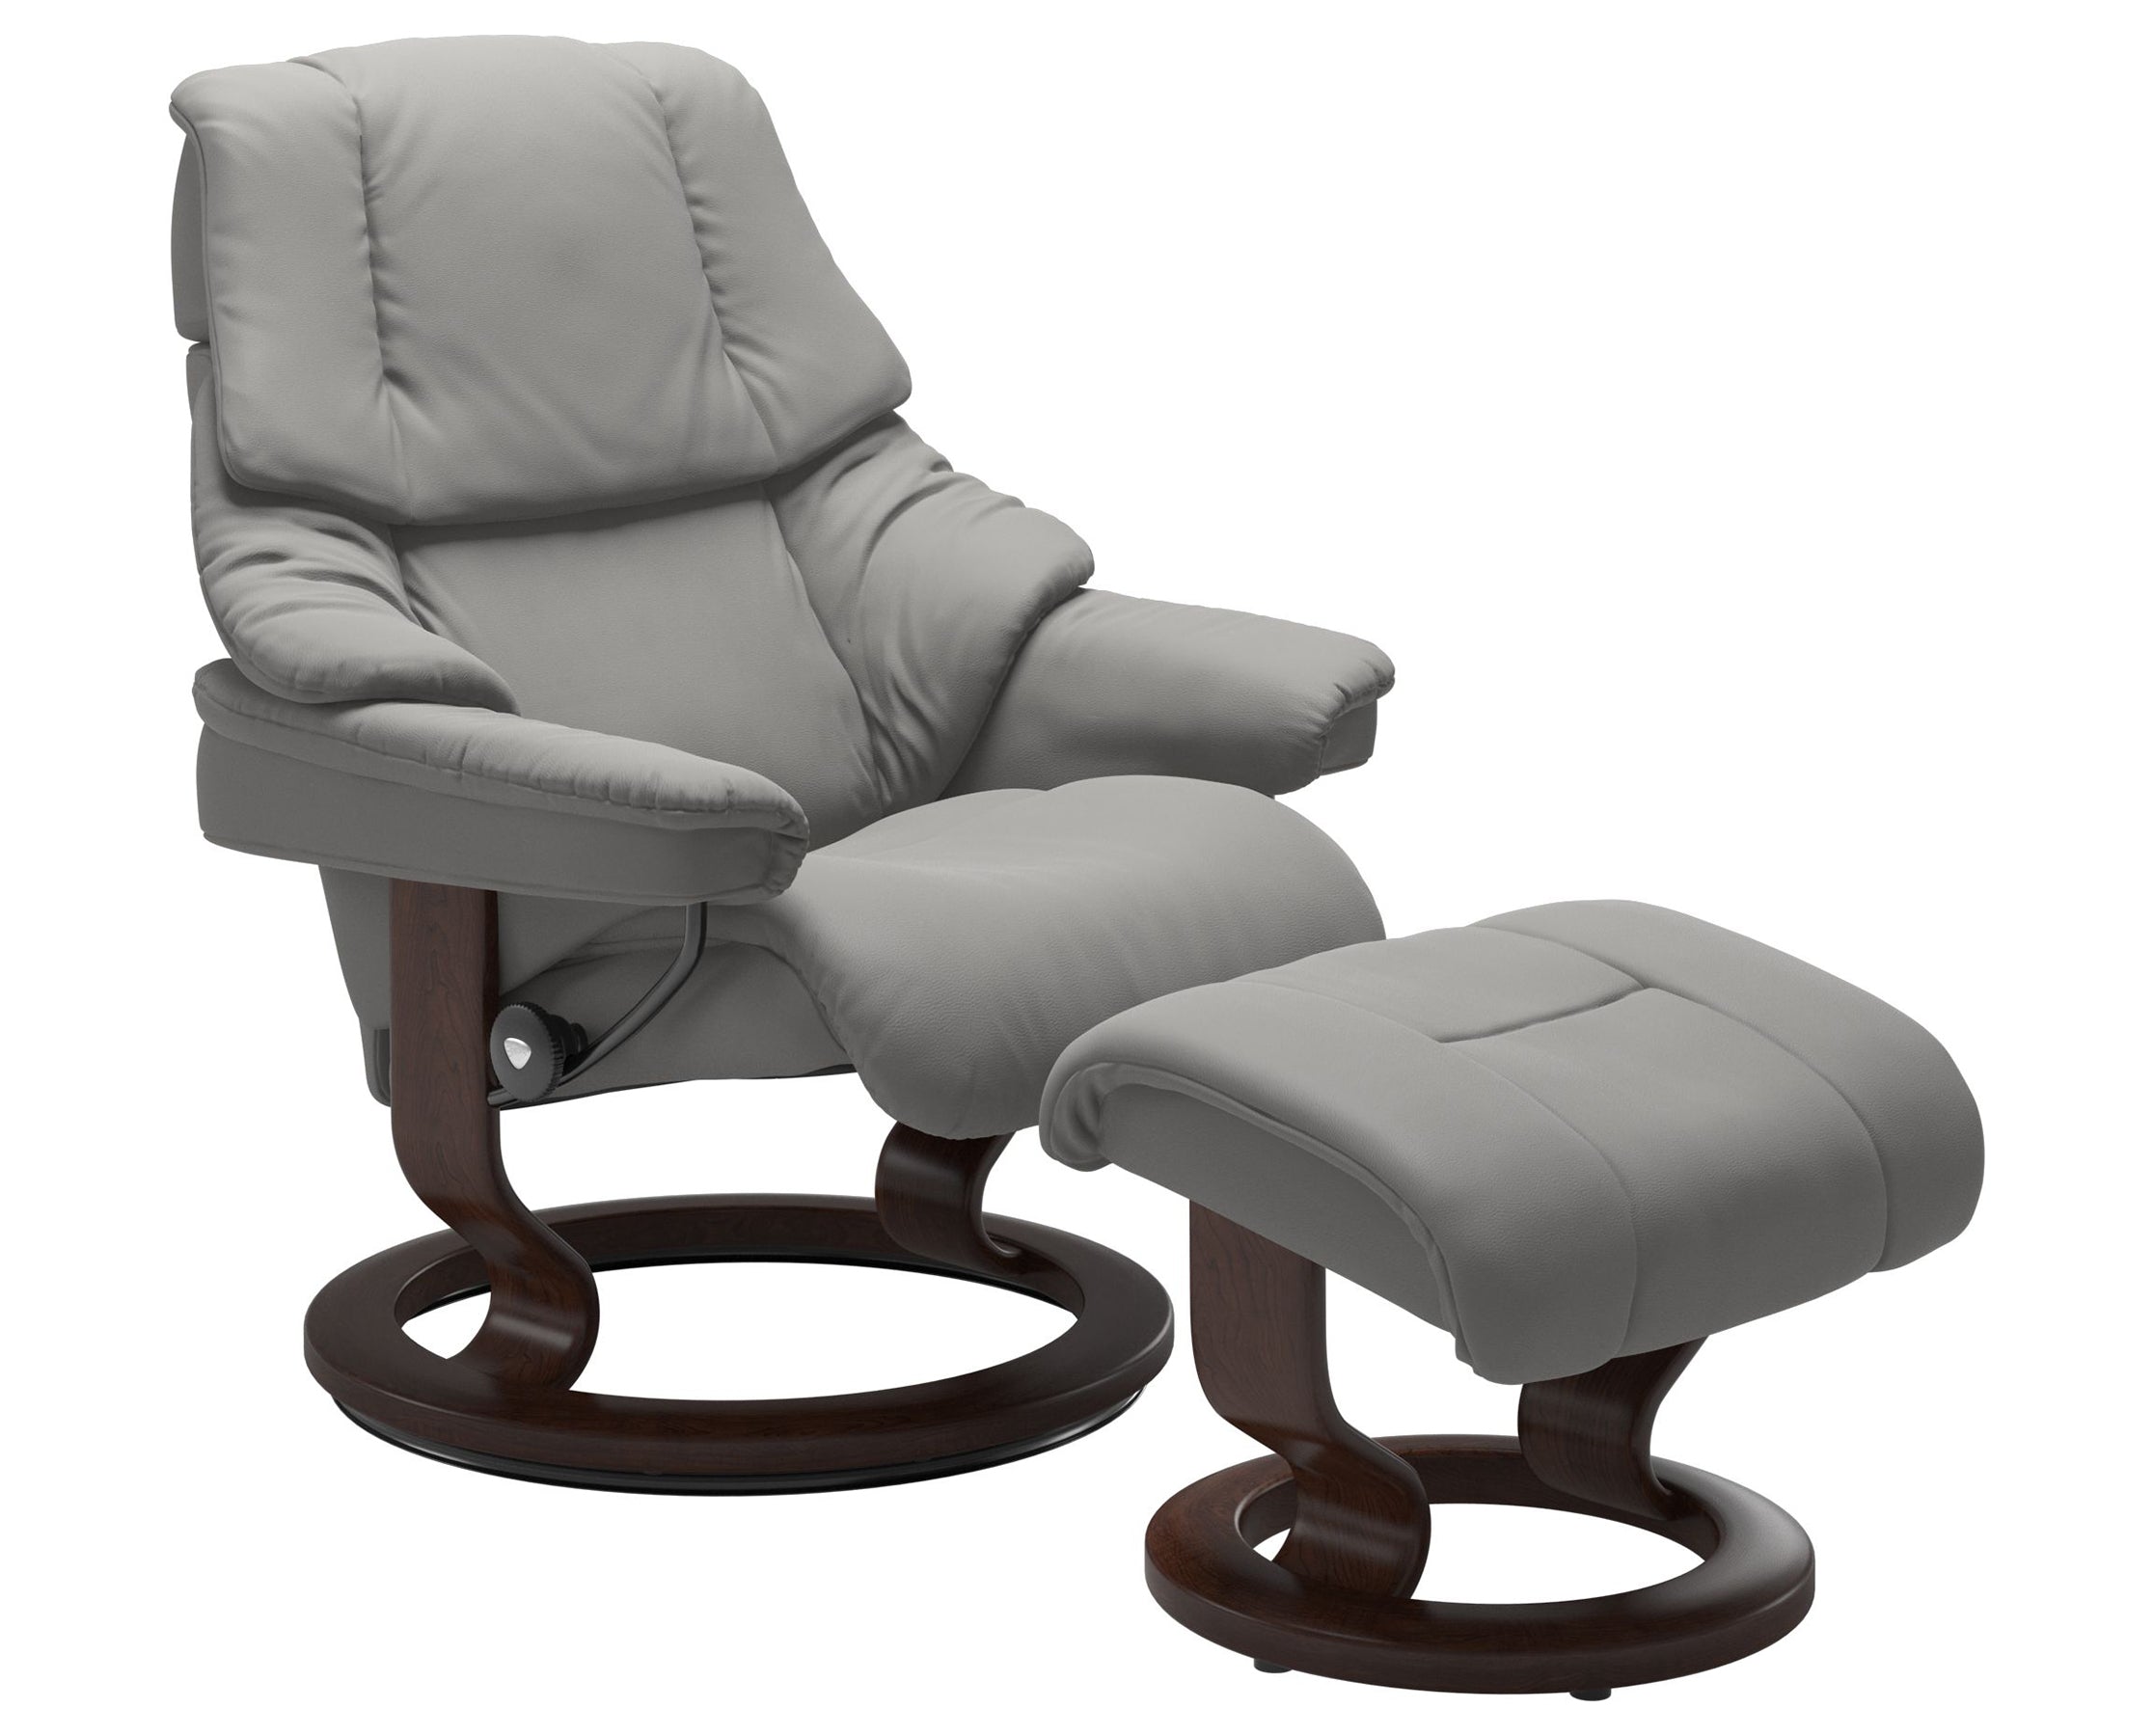 Paloma Leather Silver Grey S/M/L and Brown Base | Stressless Reno Classic Recliner | Valley Ridge Furniture